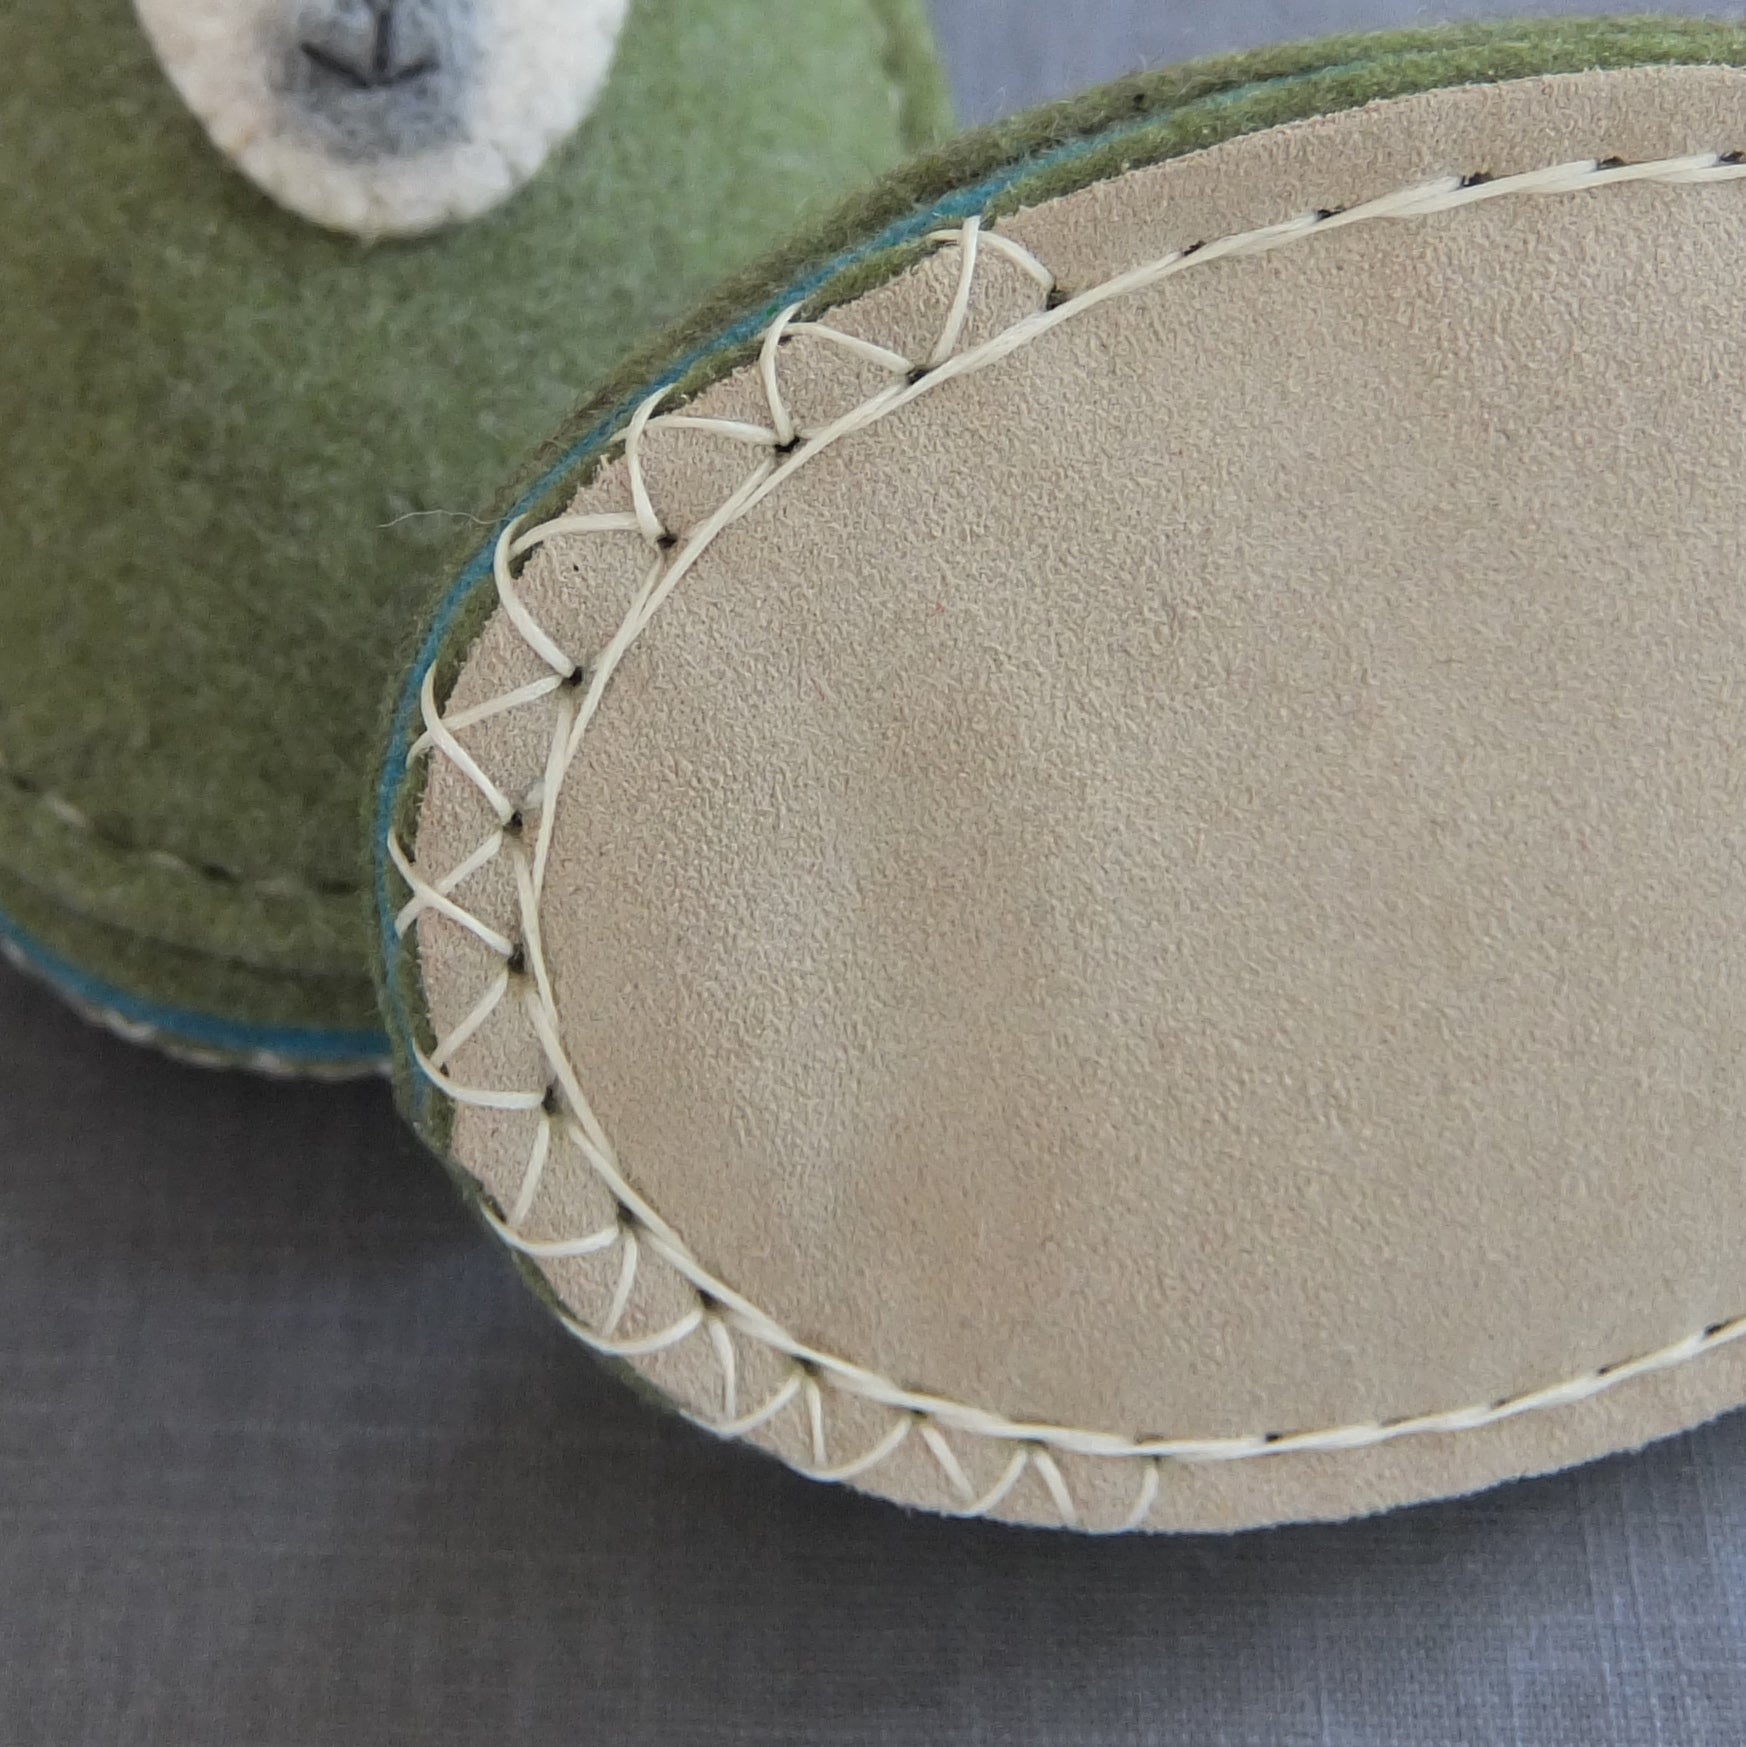 slipper soles for sewing